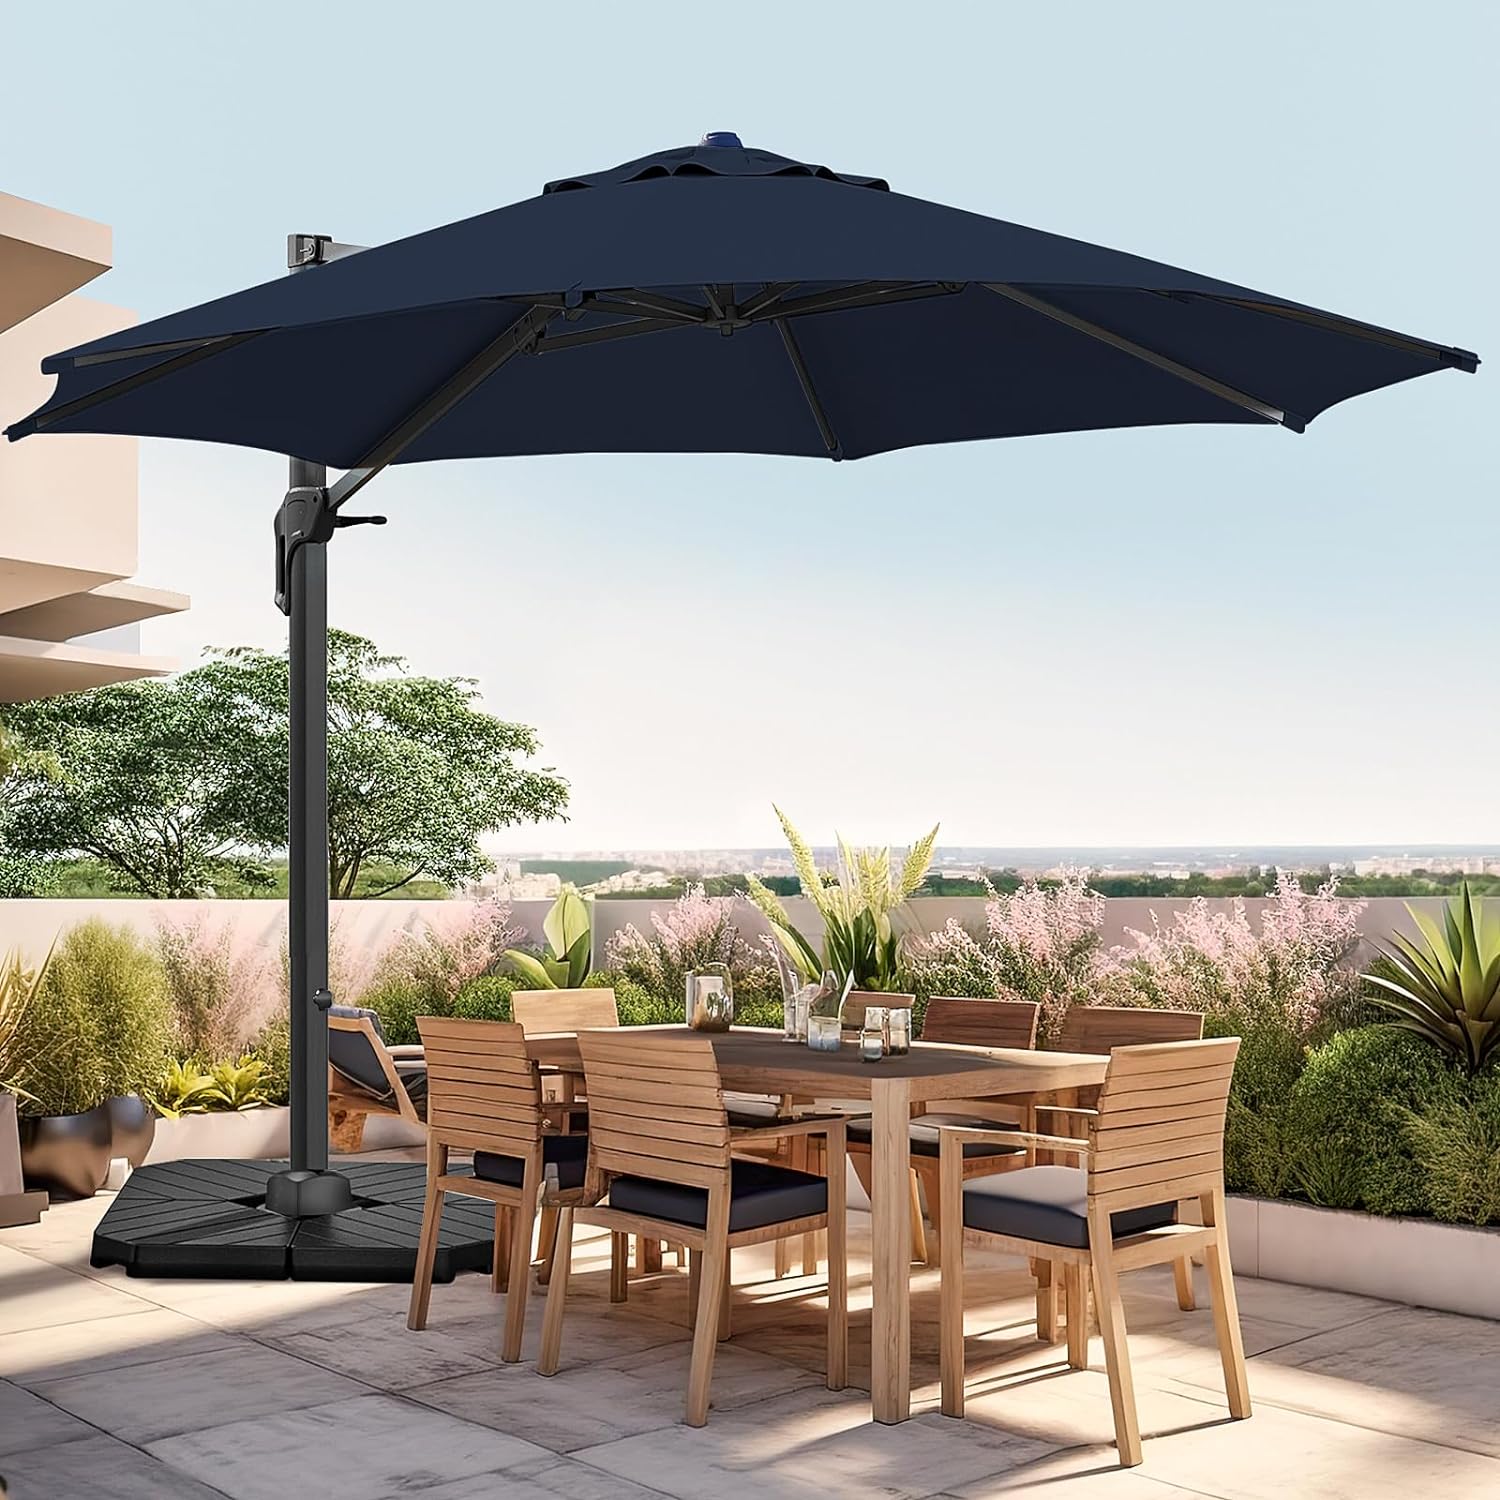 wikiwiki 12 FT Cantilever Patio Umbrellas Outdoor Large Offset Umbrella w/ 36 Month Fade Resistance Recycled Fabric, 6-Level 360Rotation Aluminum Pole for Deck Pool Garden, Navy Blue